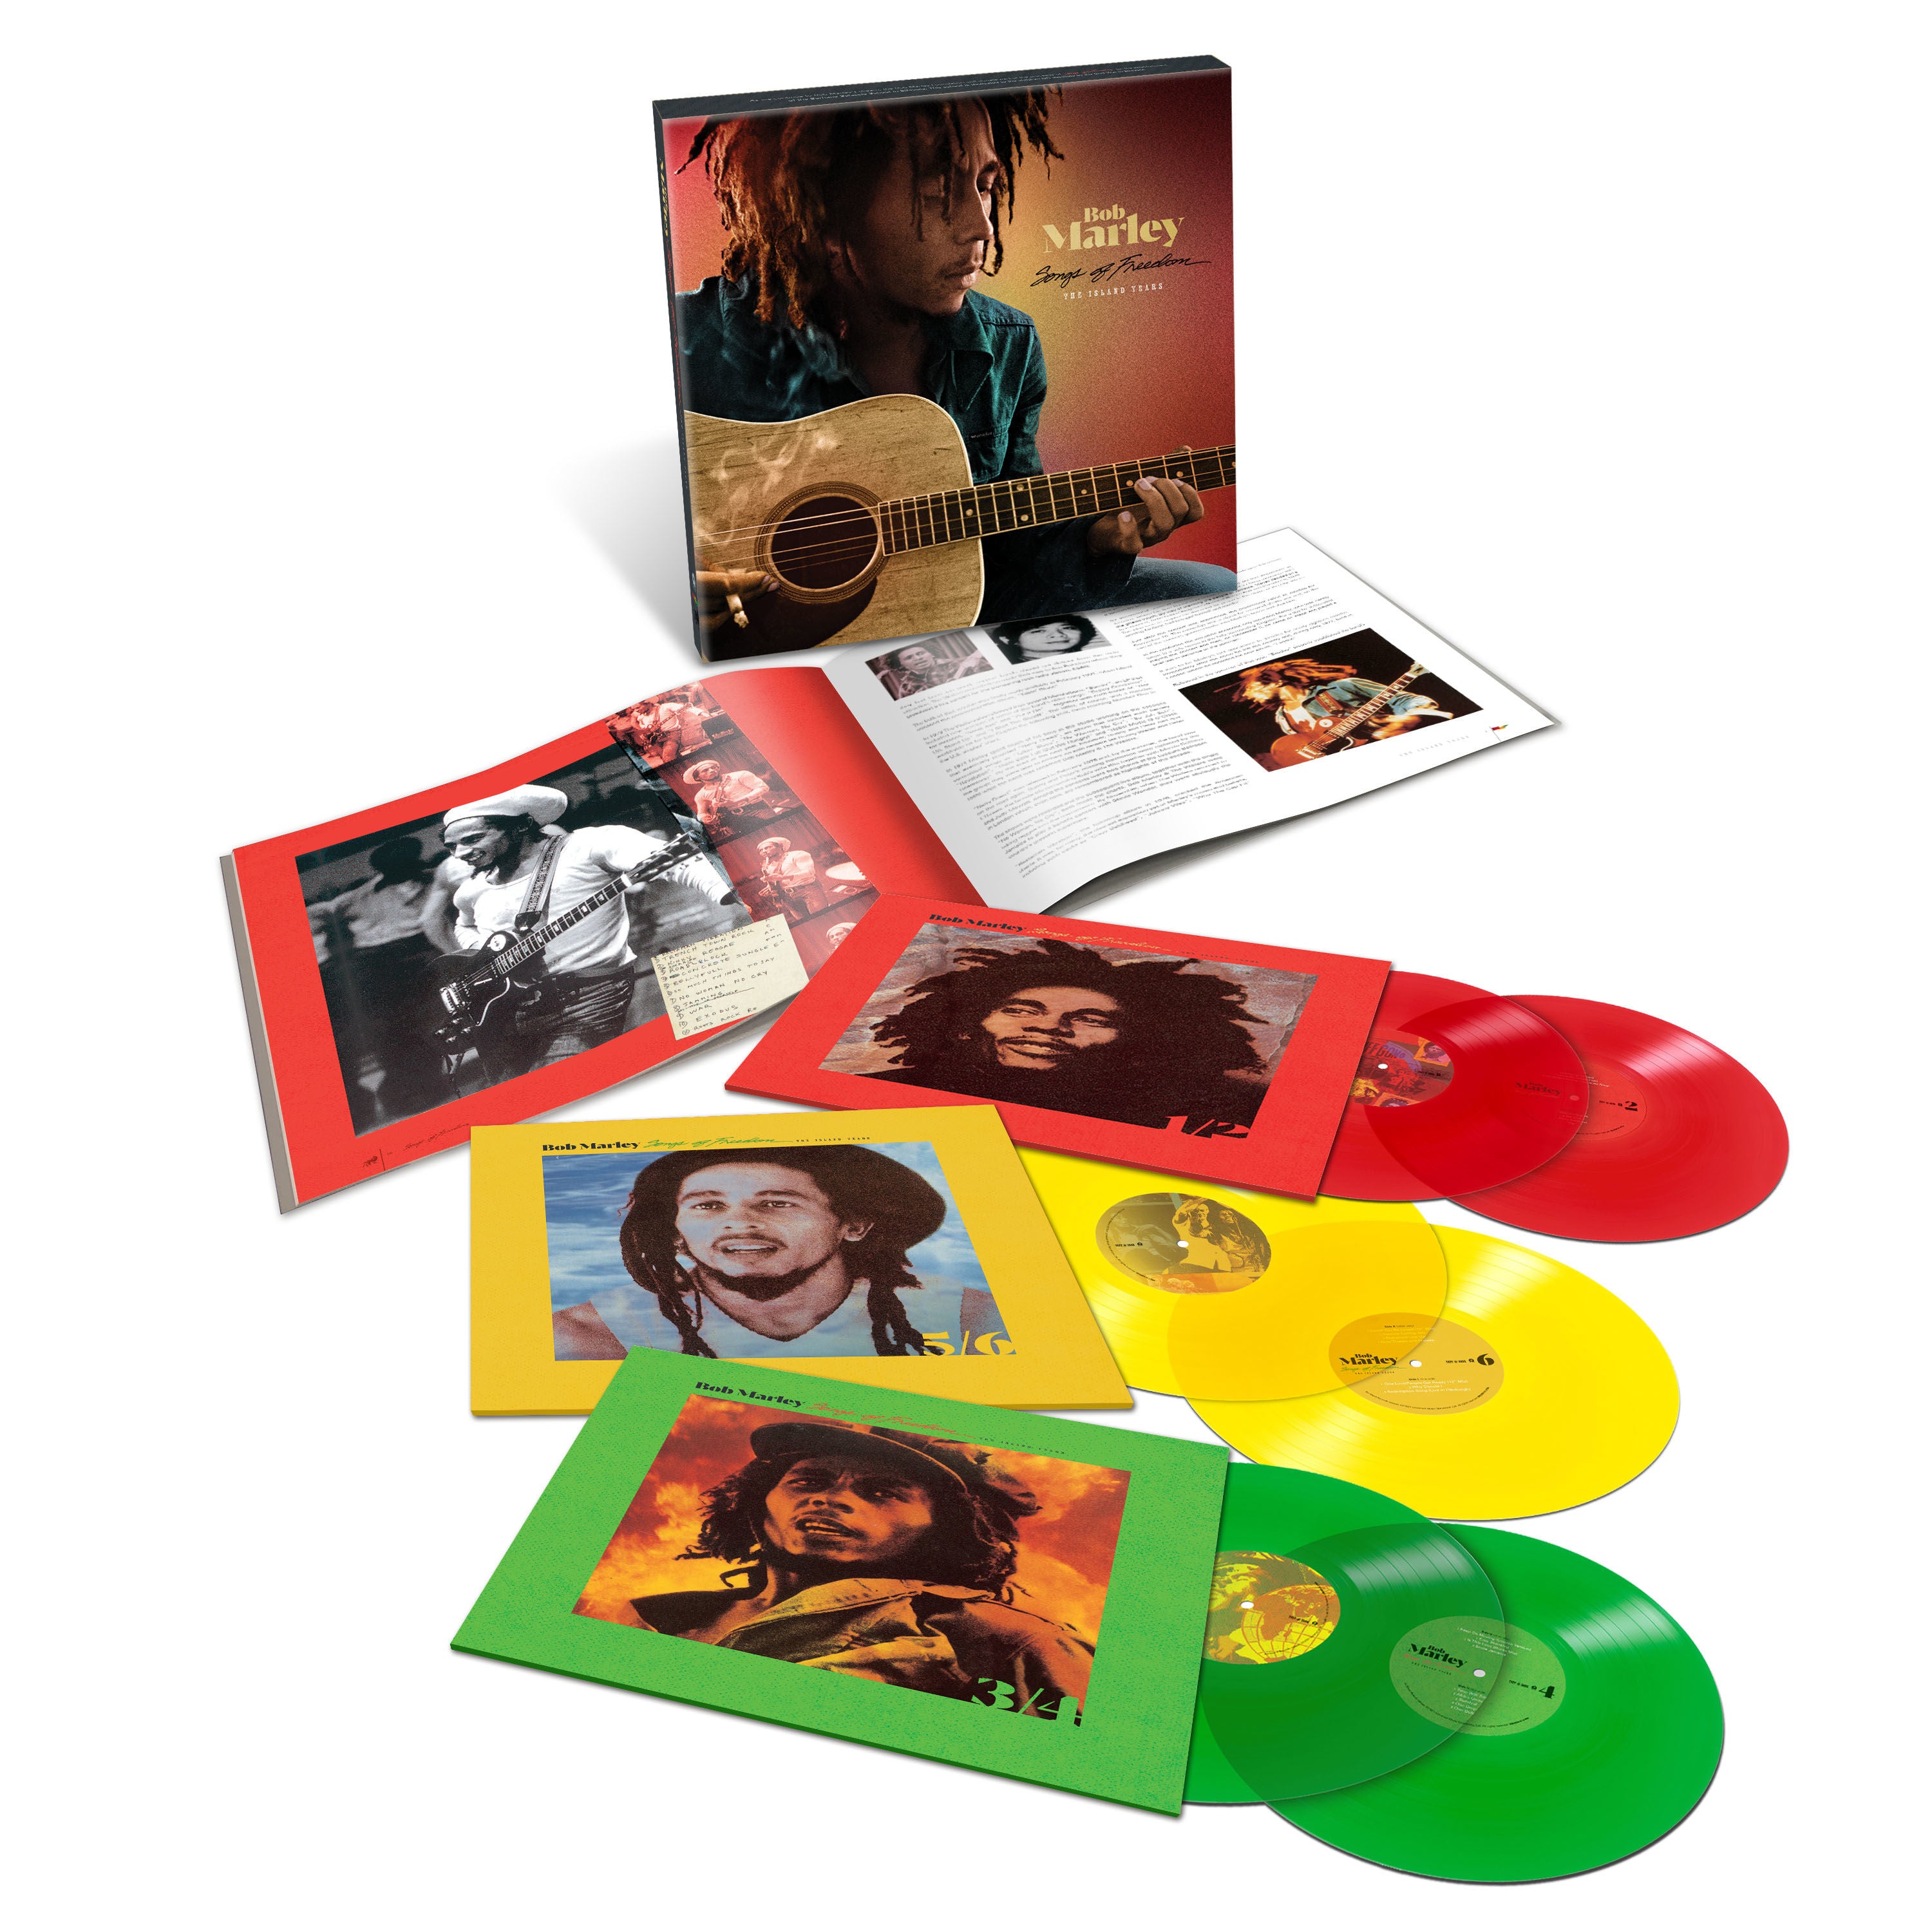 Bob Marley - Songs Of Freedom: The Island Years: Exclusive Coloured Vinyl Box Set